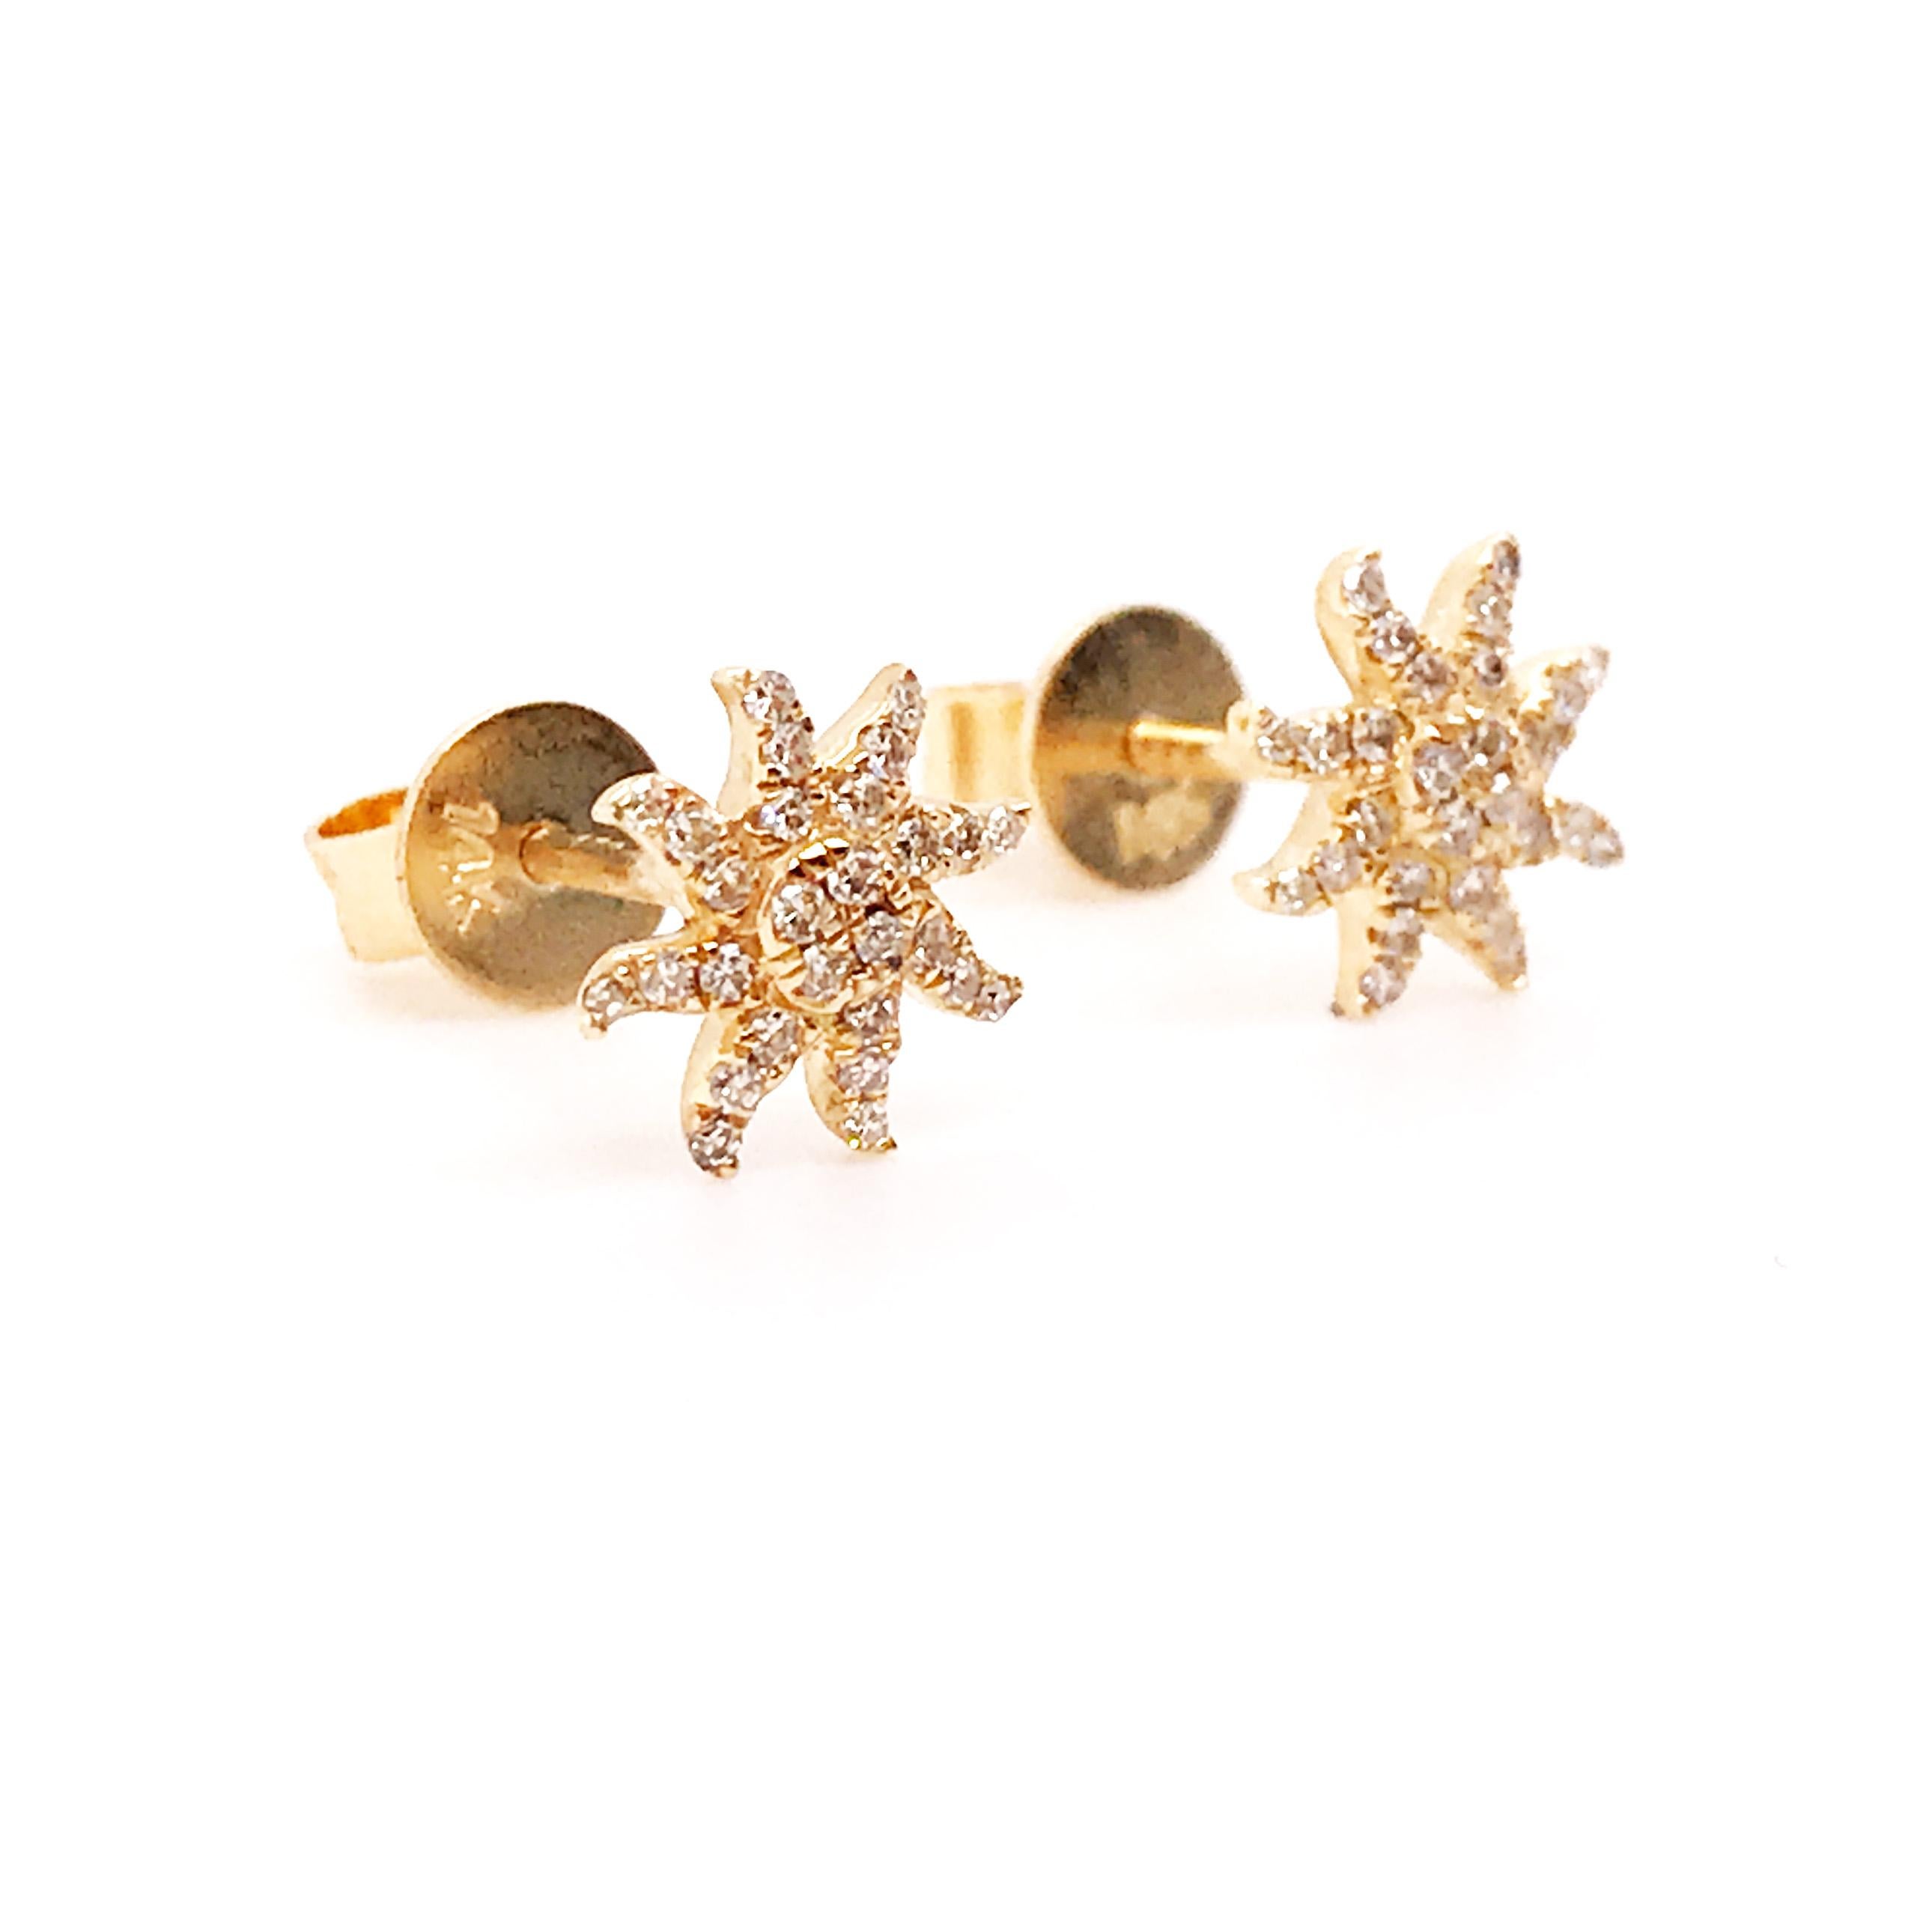 Brighten your day with these starburst sun earrings! Paved in diamonds, these earrings are so special and adorable. These diamond stud earrings have great personality and add a creative touch to any fine jewelry collection. These would make such a